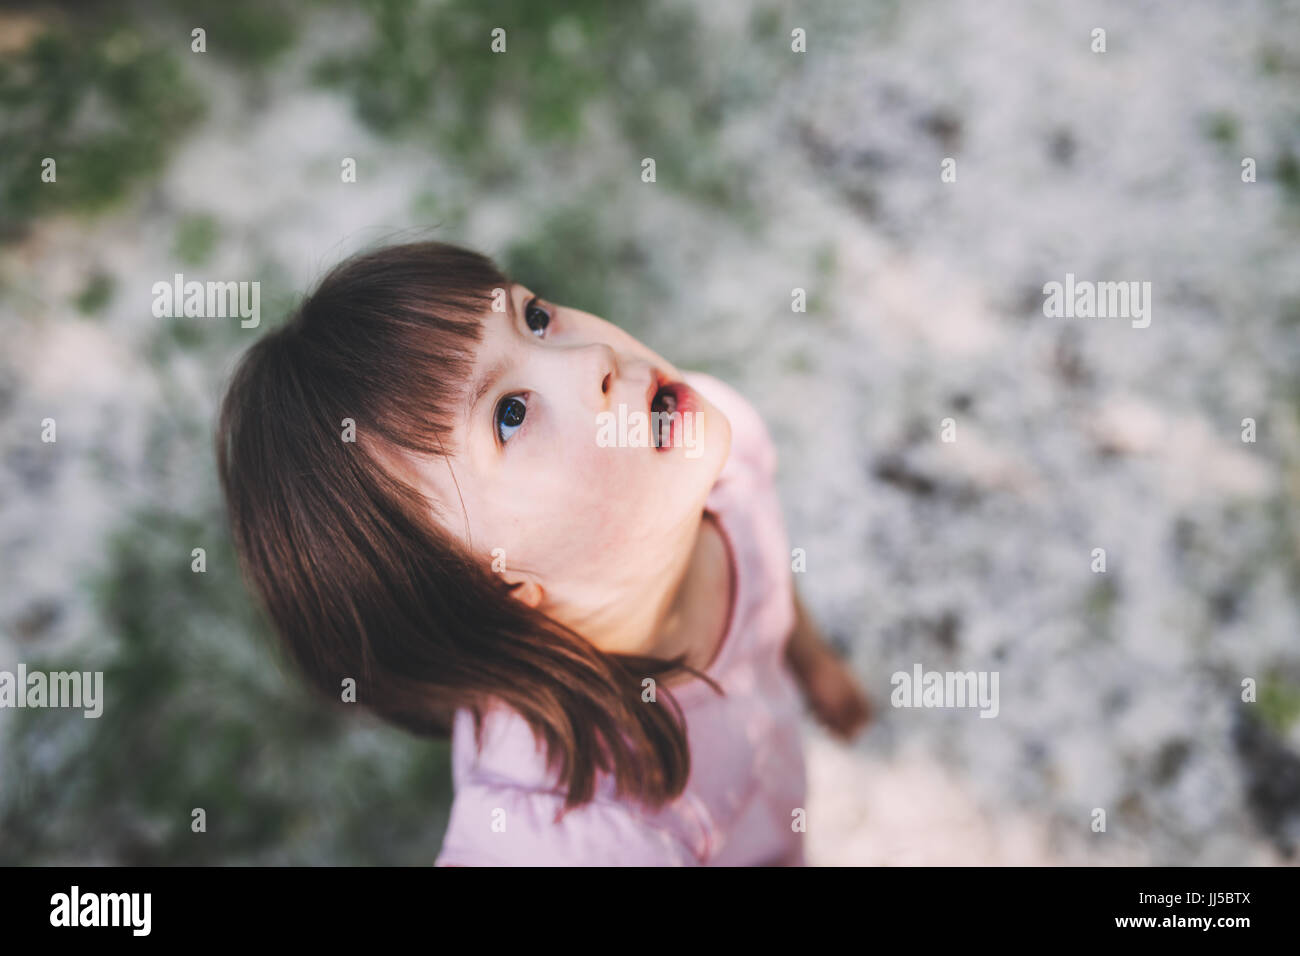 Portrait of young girl with down syndrome Stock Photo